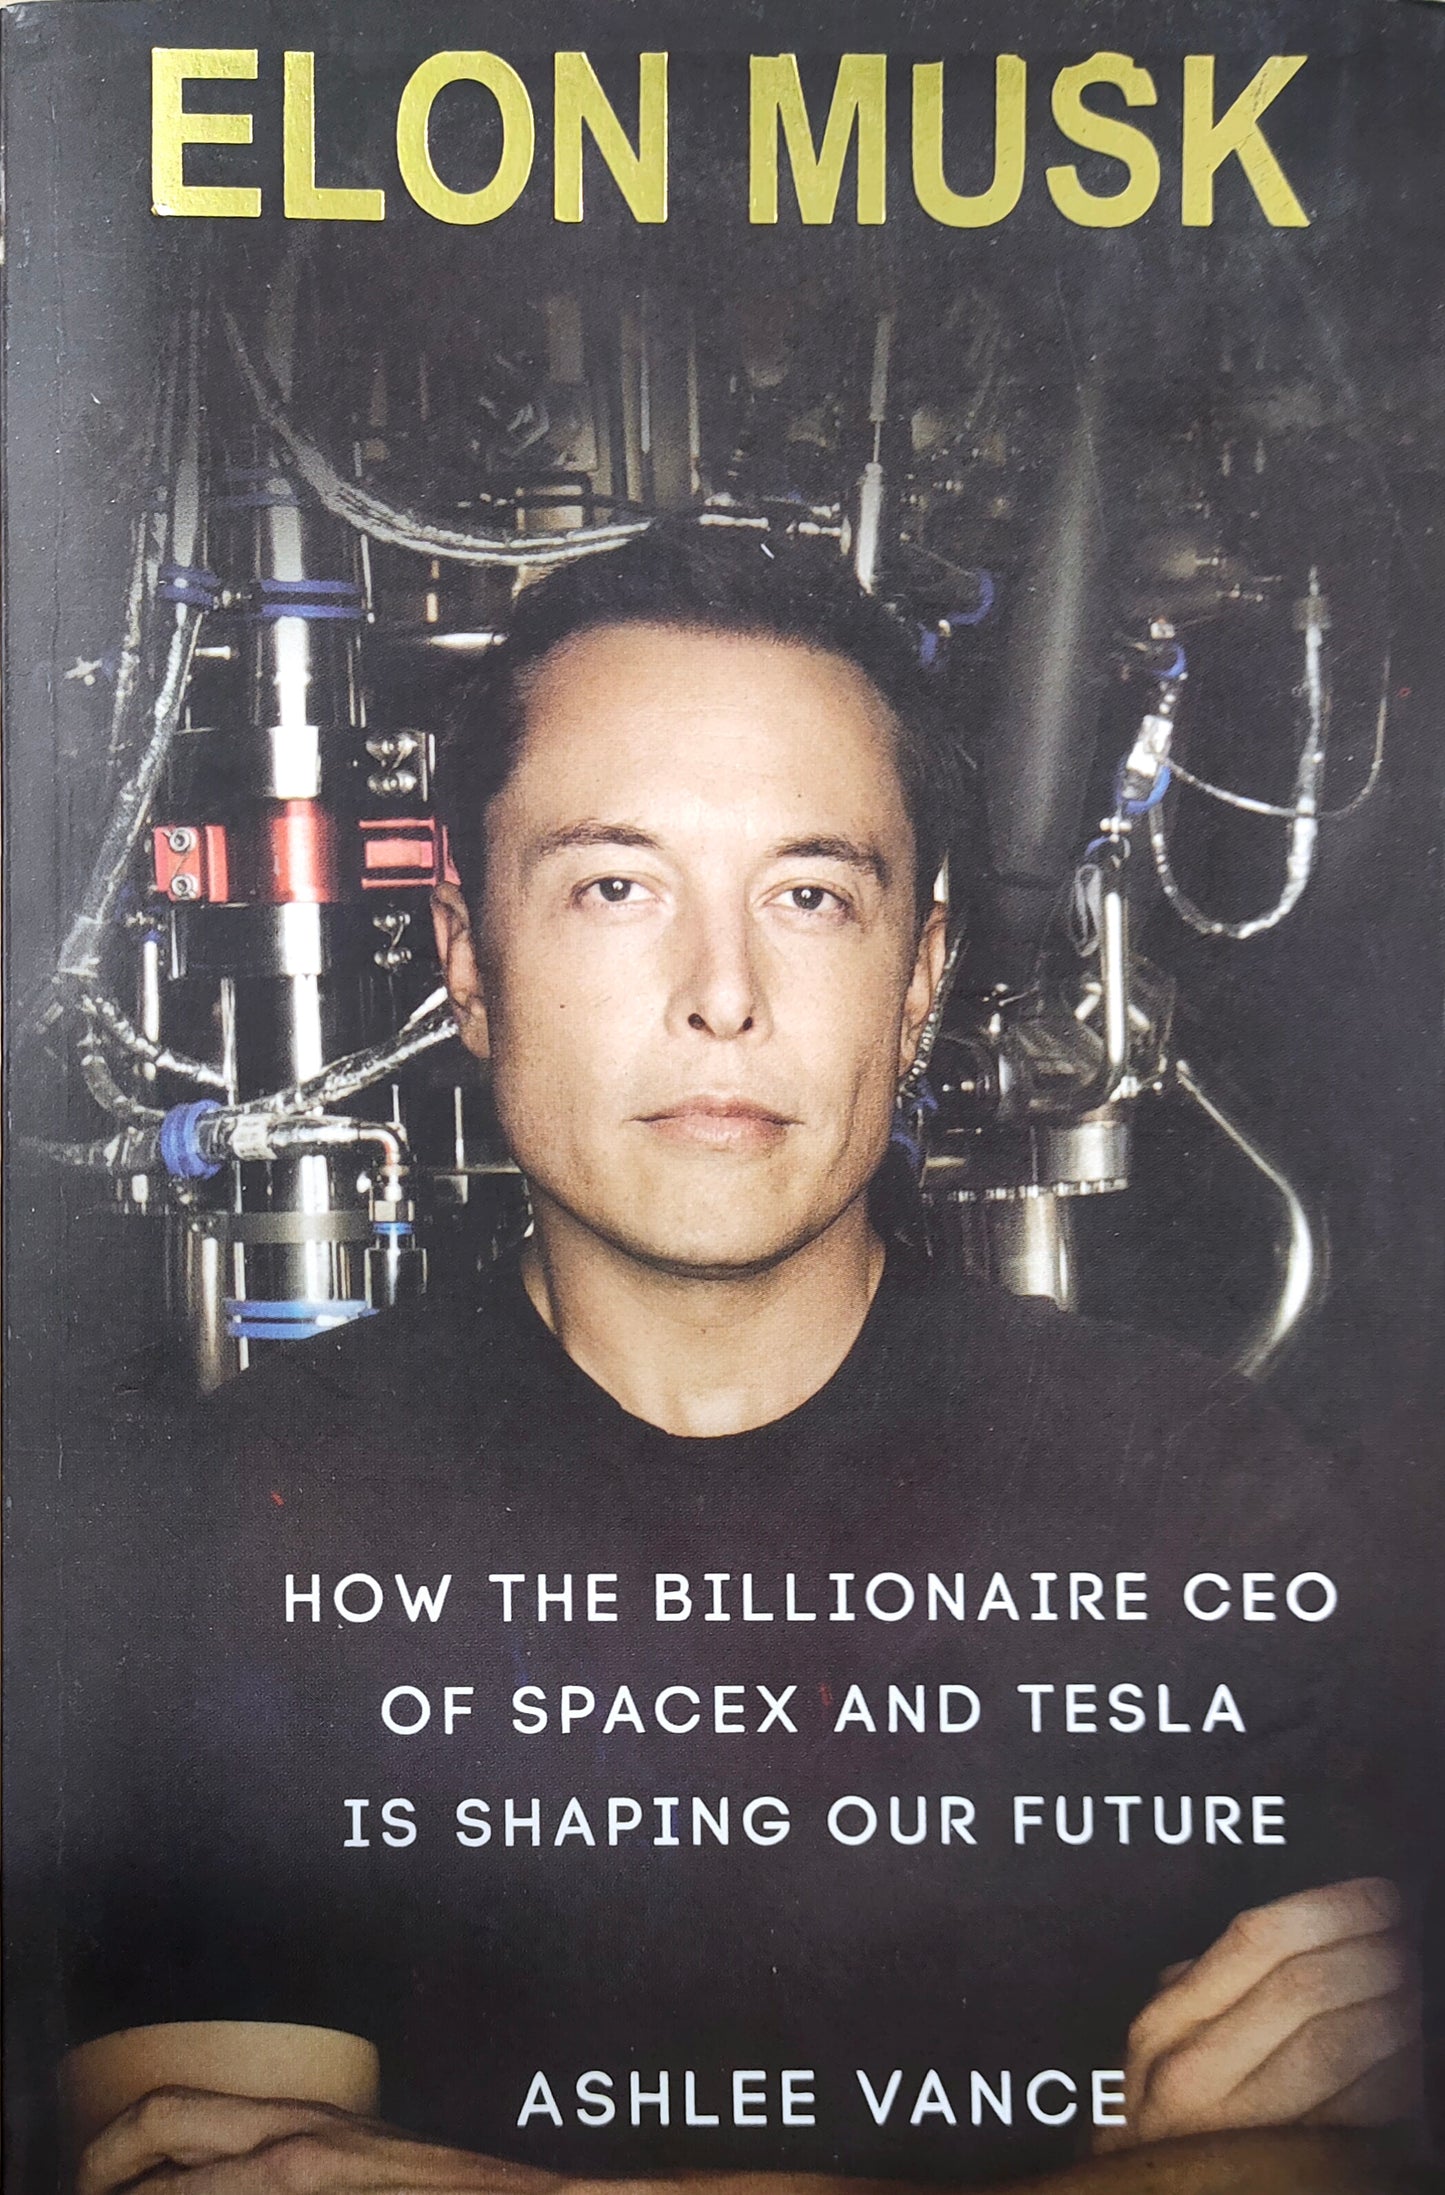 How the billionaire of spacex and tesla is shaping our future